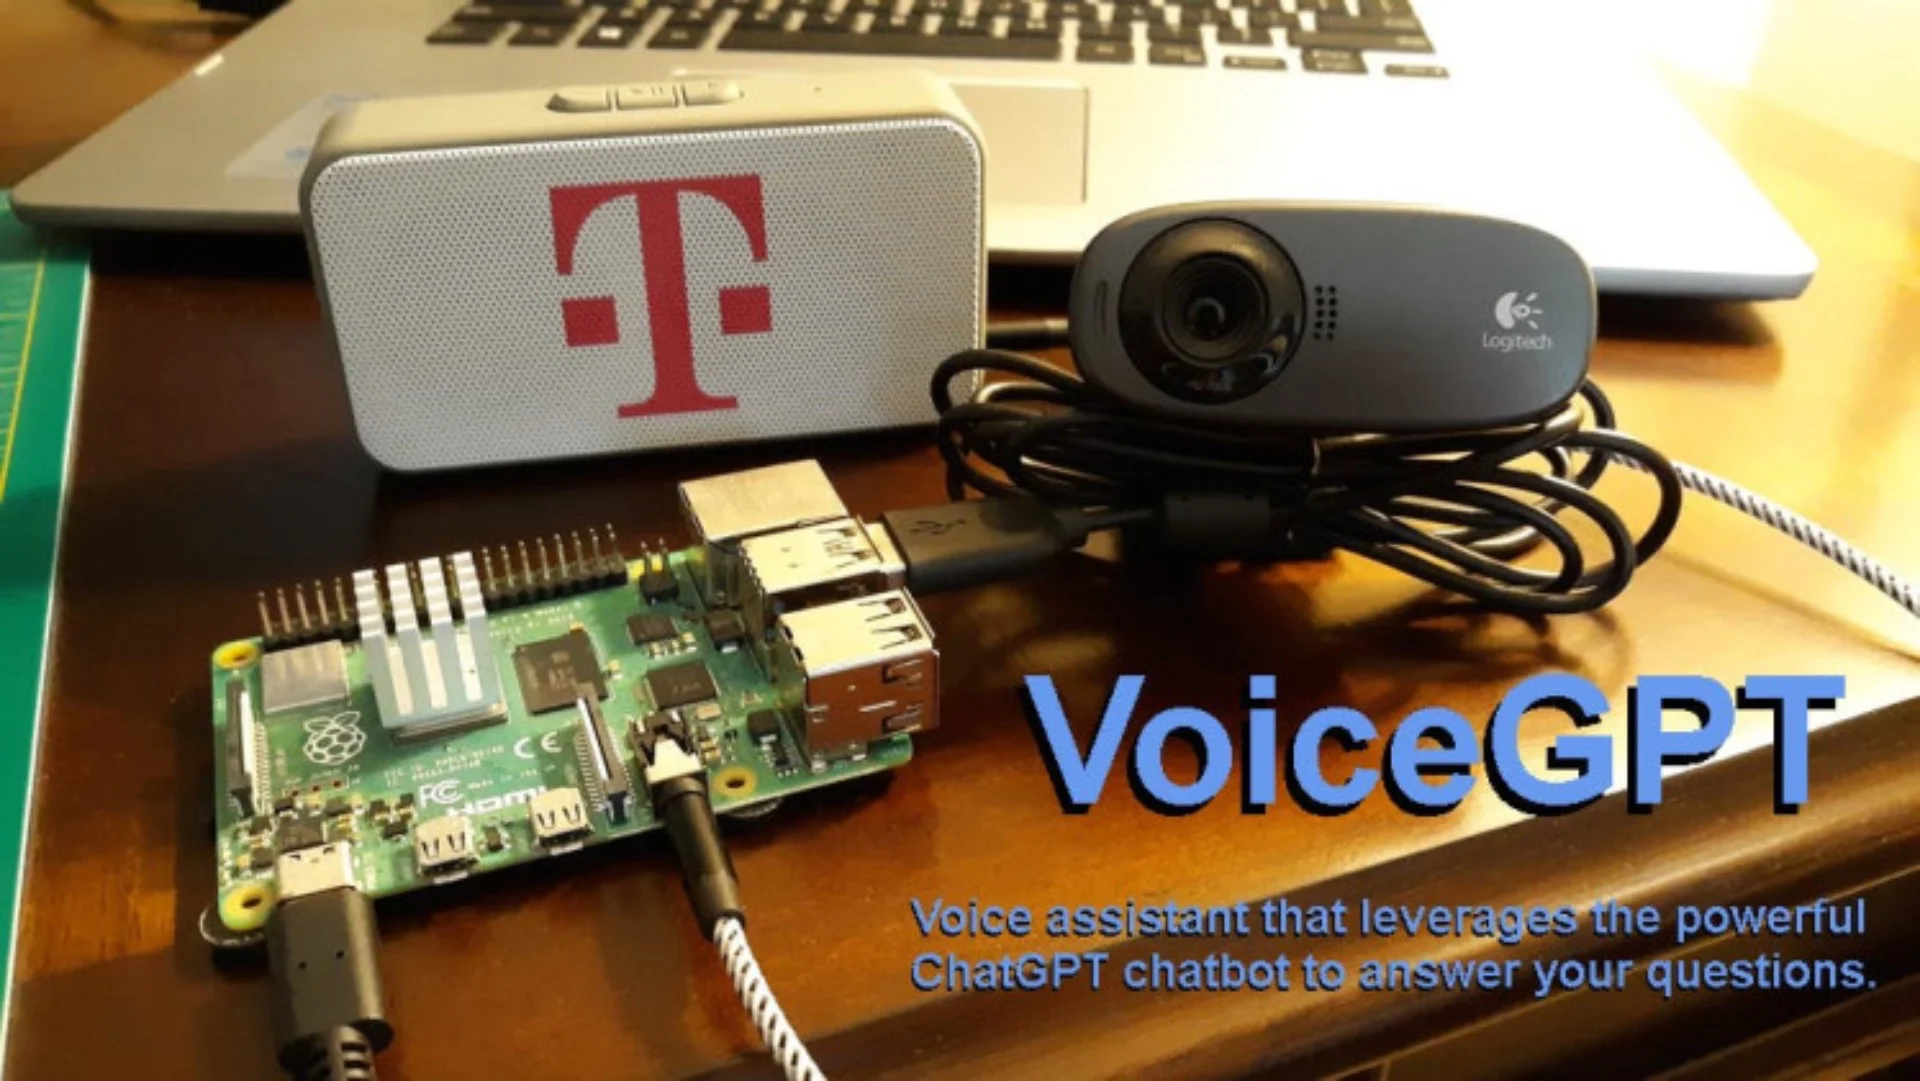 How To Transform Your Raspberry Pi into a Voice Assistant Using VoiceGPT